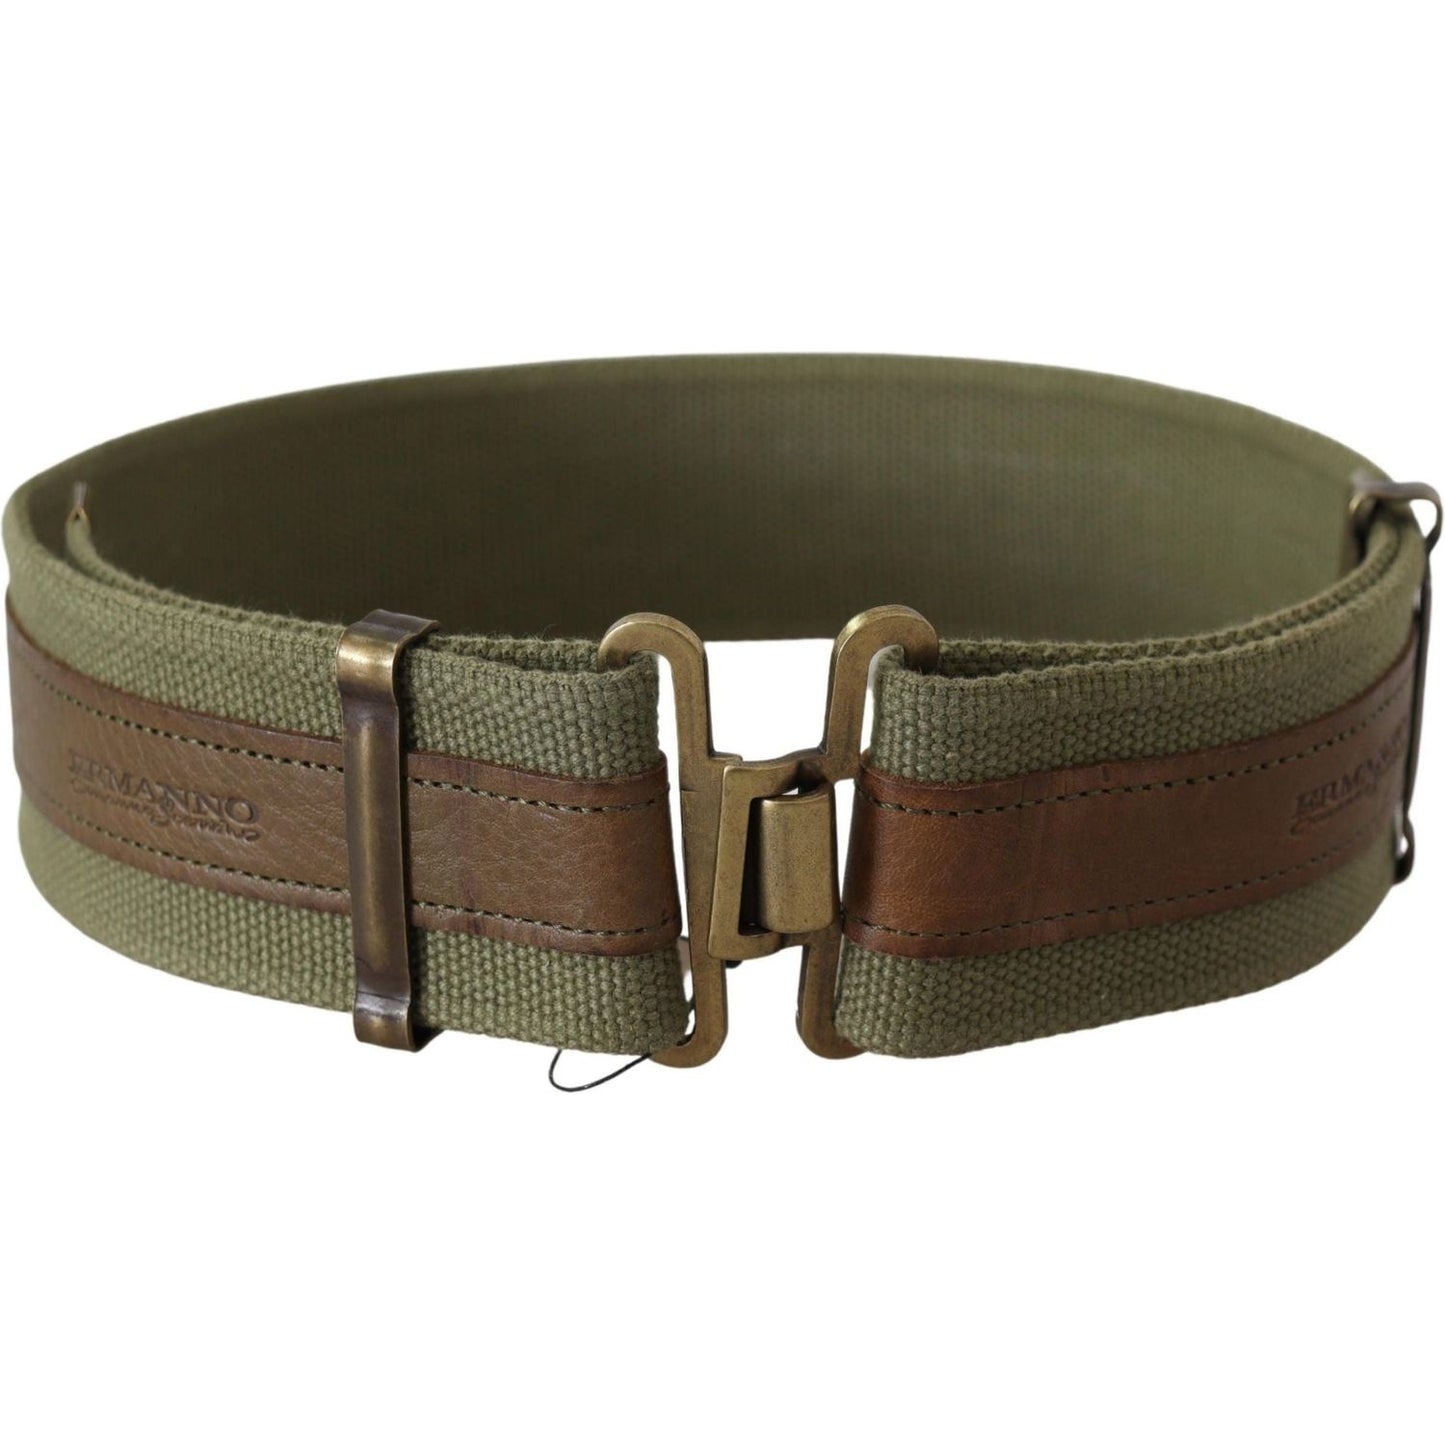 Ermanno Scervino Chic Army Green Rustic Belt green-leather-rustic-bronze-buckle-army-belt Belt IMG_0657-scaled-5fa81896-a12.jpg